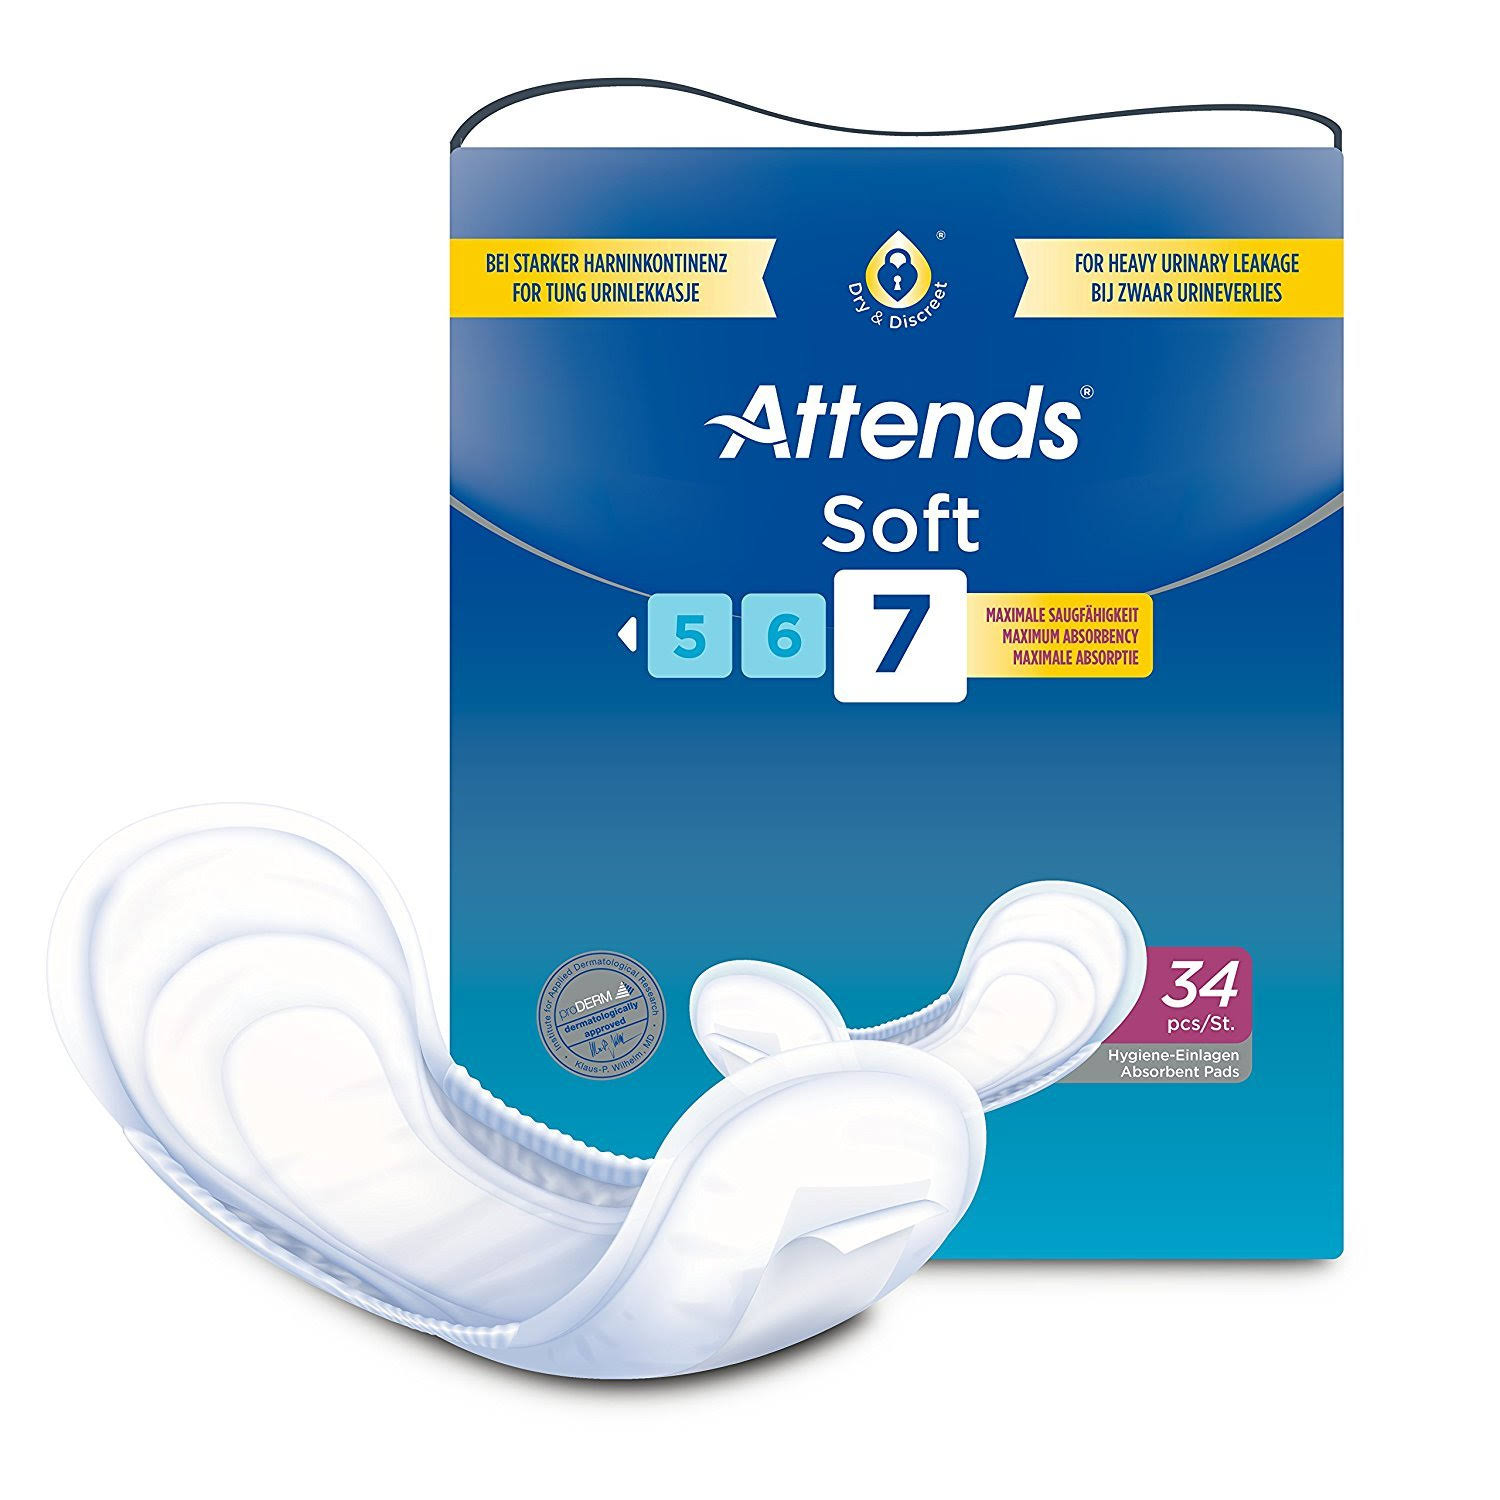 Attends Soft 7 Pads - 34 Pack